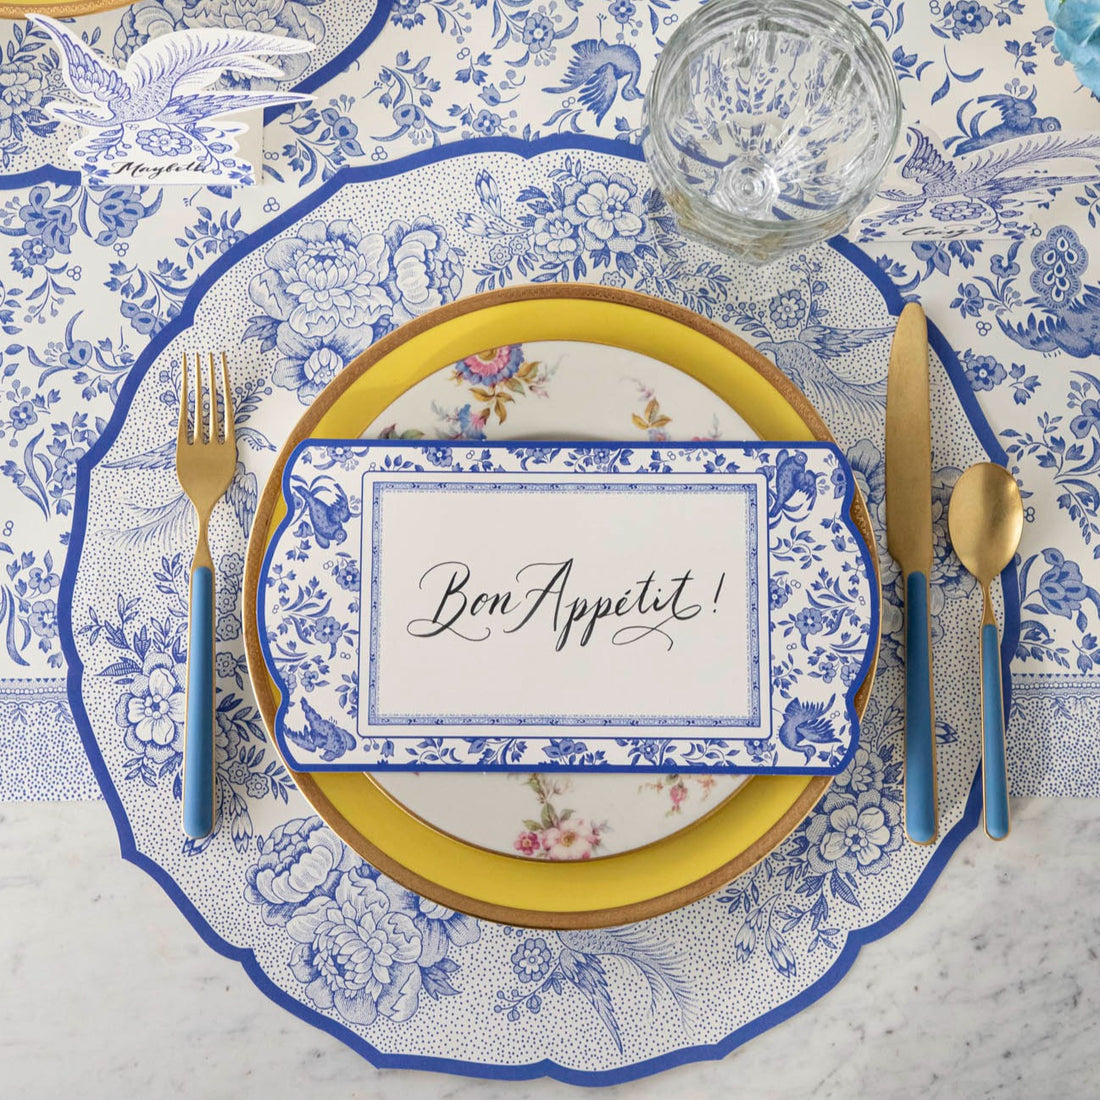 An elegant blue and white place setting featuring a Blue Regal Peacock Table Card with &quot;Bon Appetit&quot; written on it in beautiful cursive resting on the plate, from above.